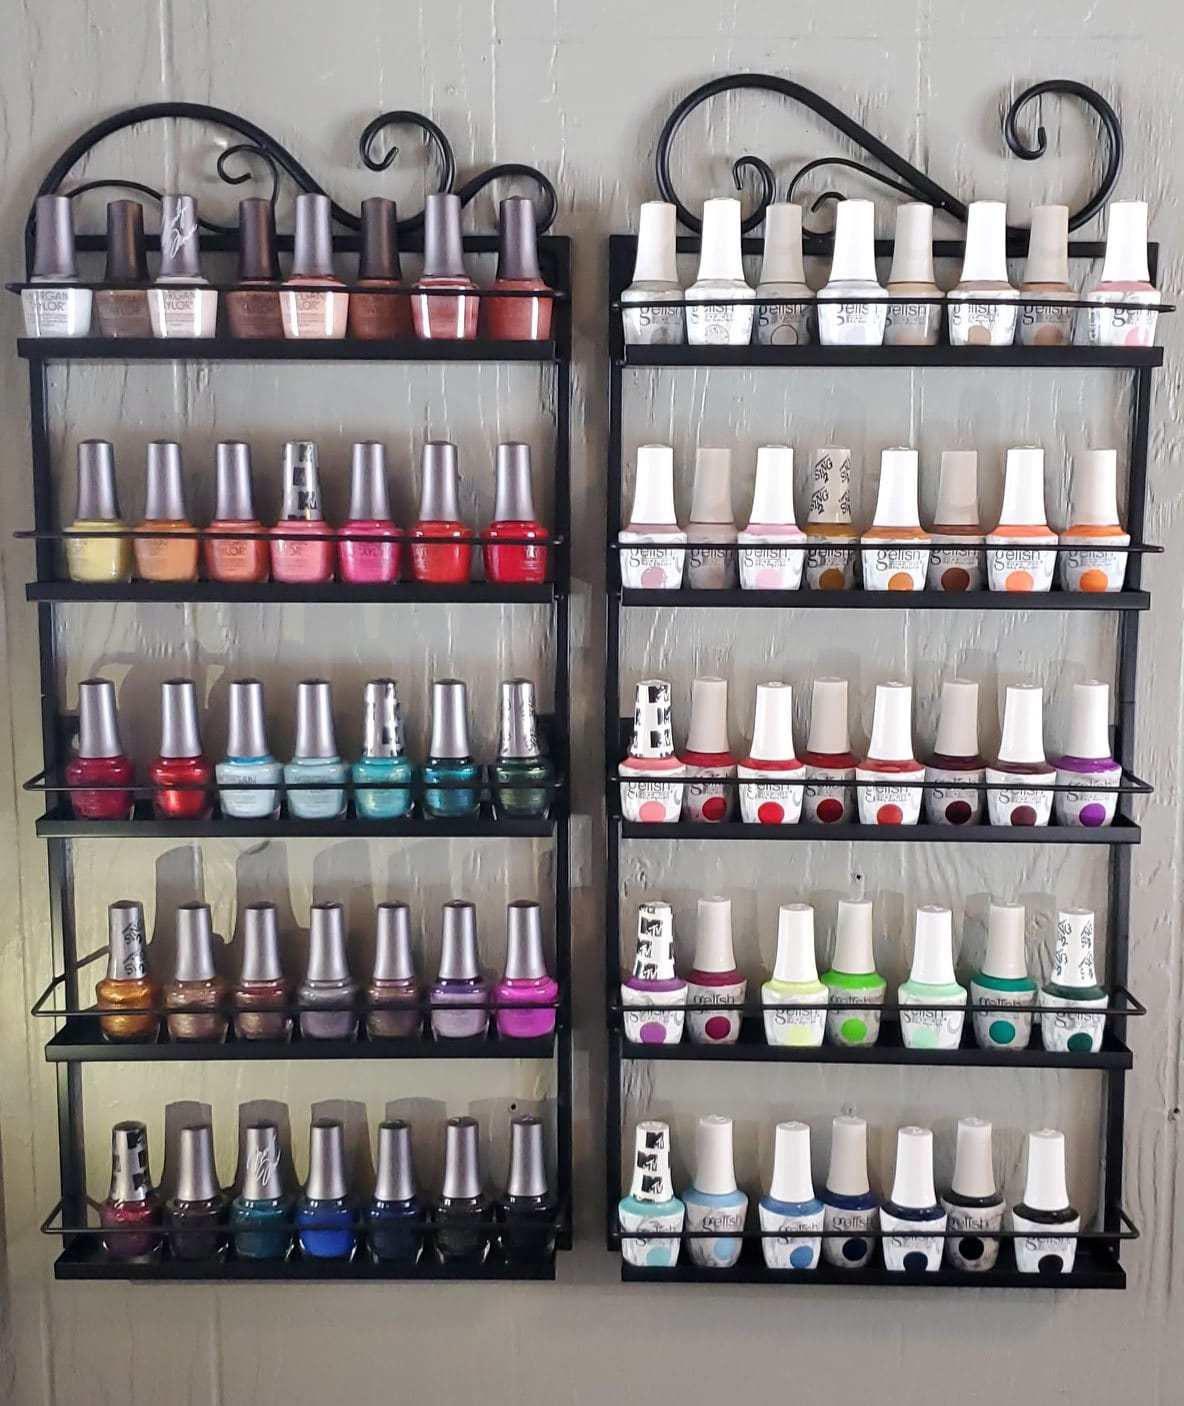 Holly's Hair & Nailcare 36037 Co Rd 66, Crosslake Minnesota 56442